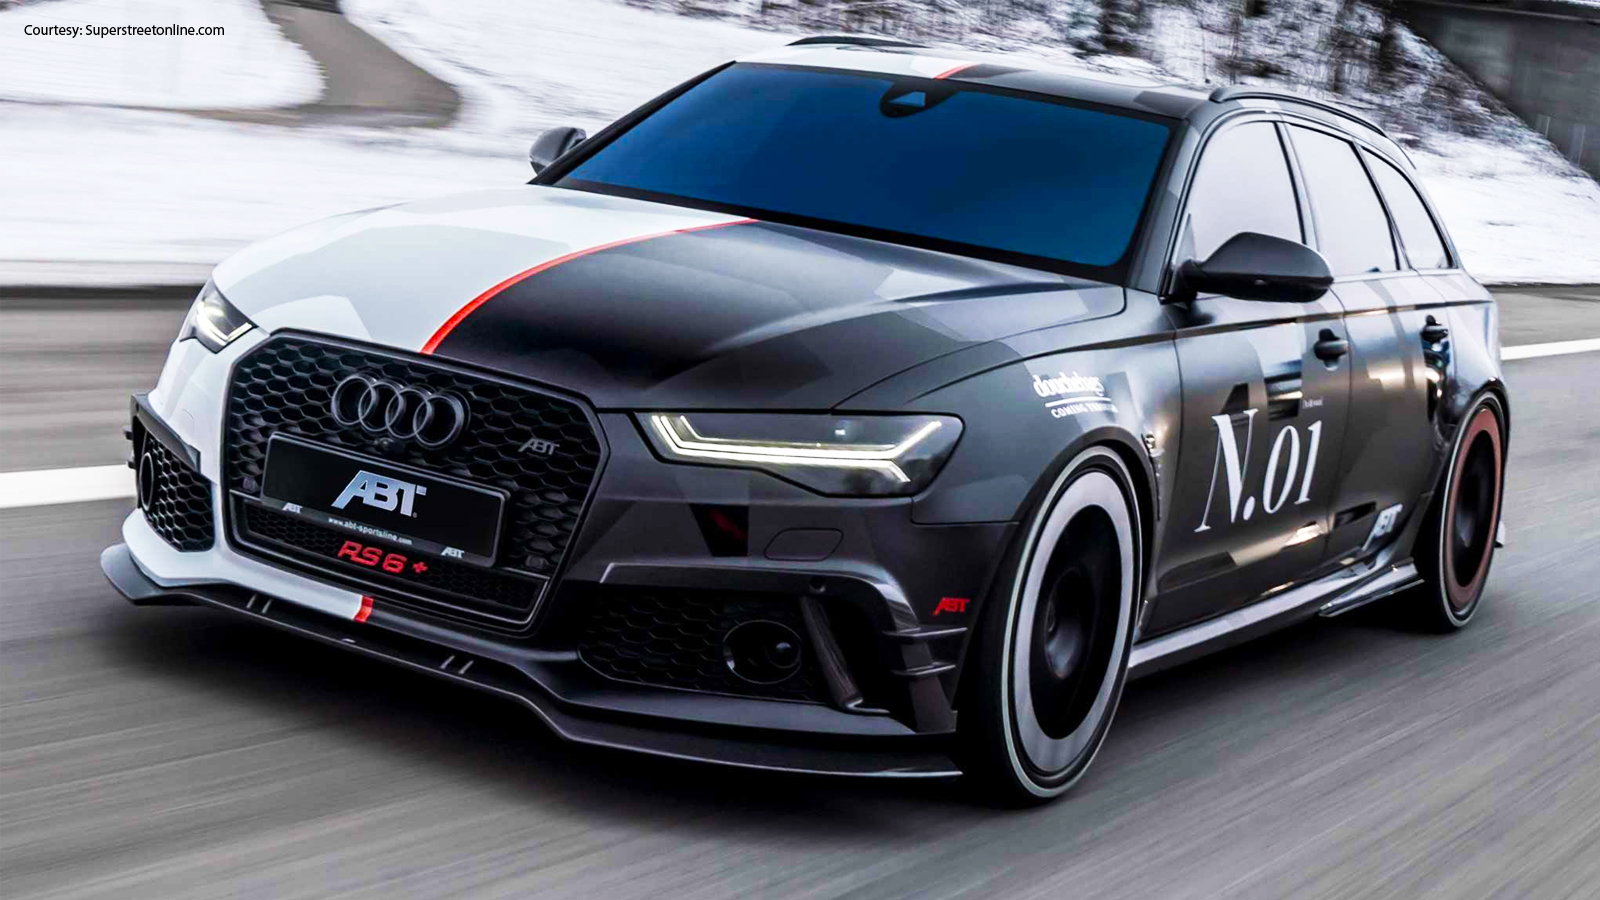 Piping Anbefalede Tidsplan Skier Jon Olsson's RS6 Wagon Replaces What Was Stolen and Burned | Audiworld